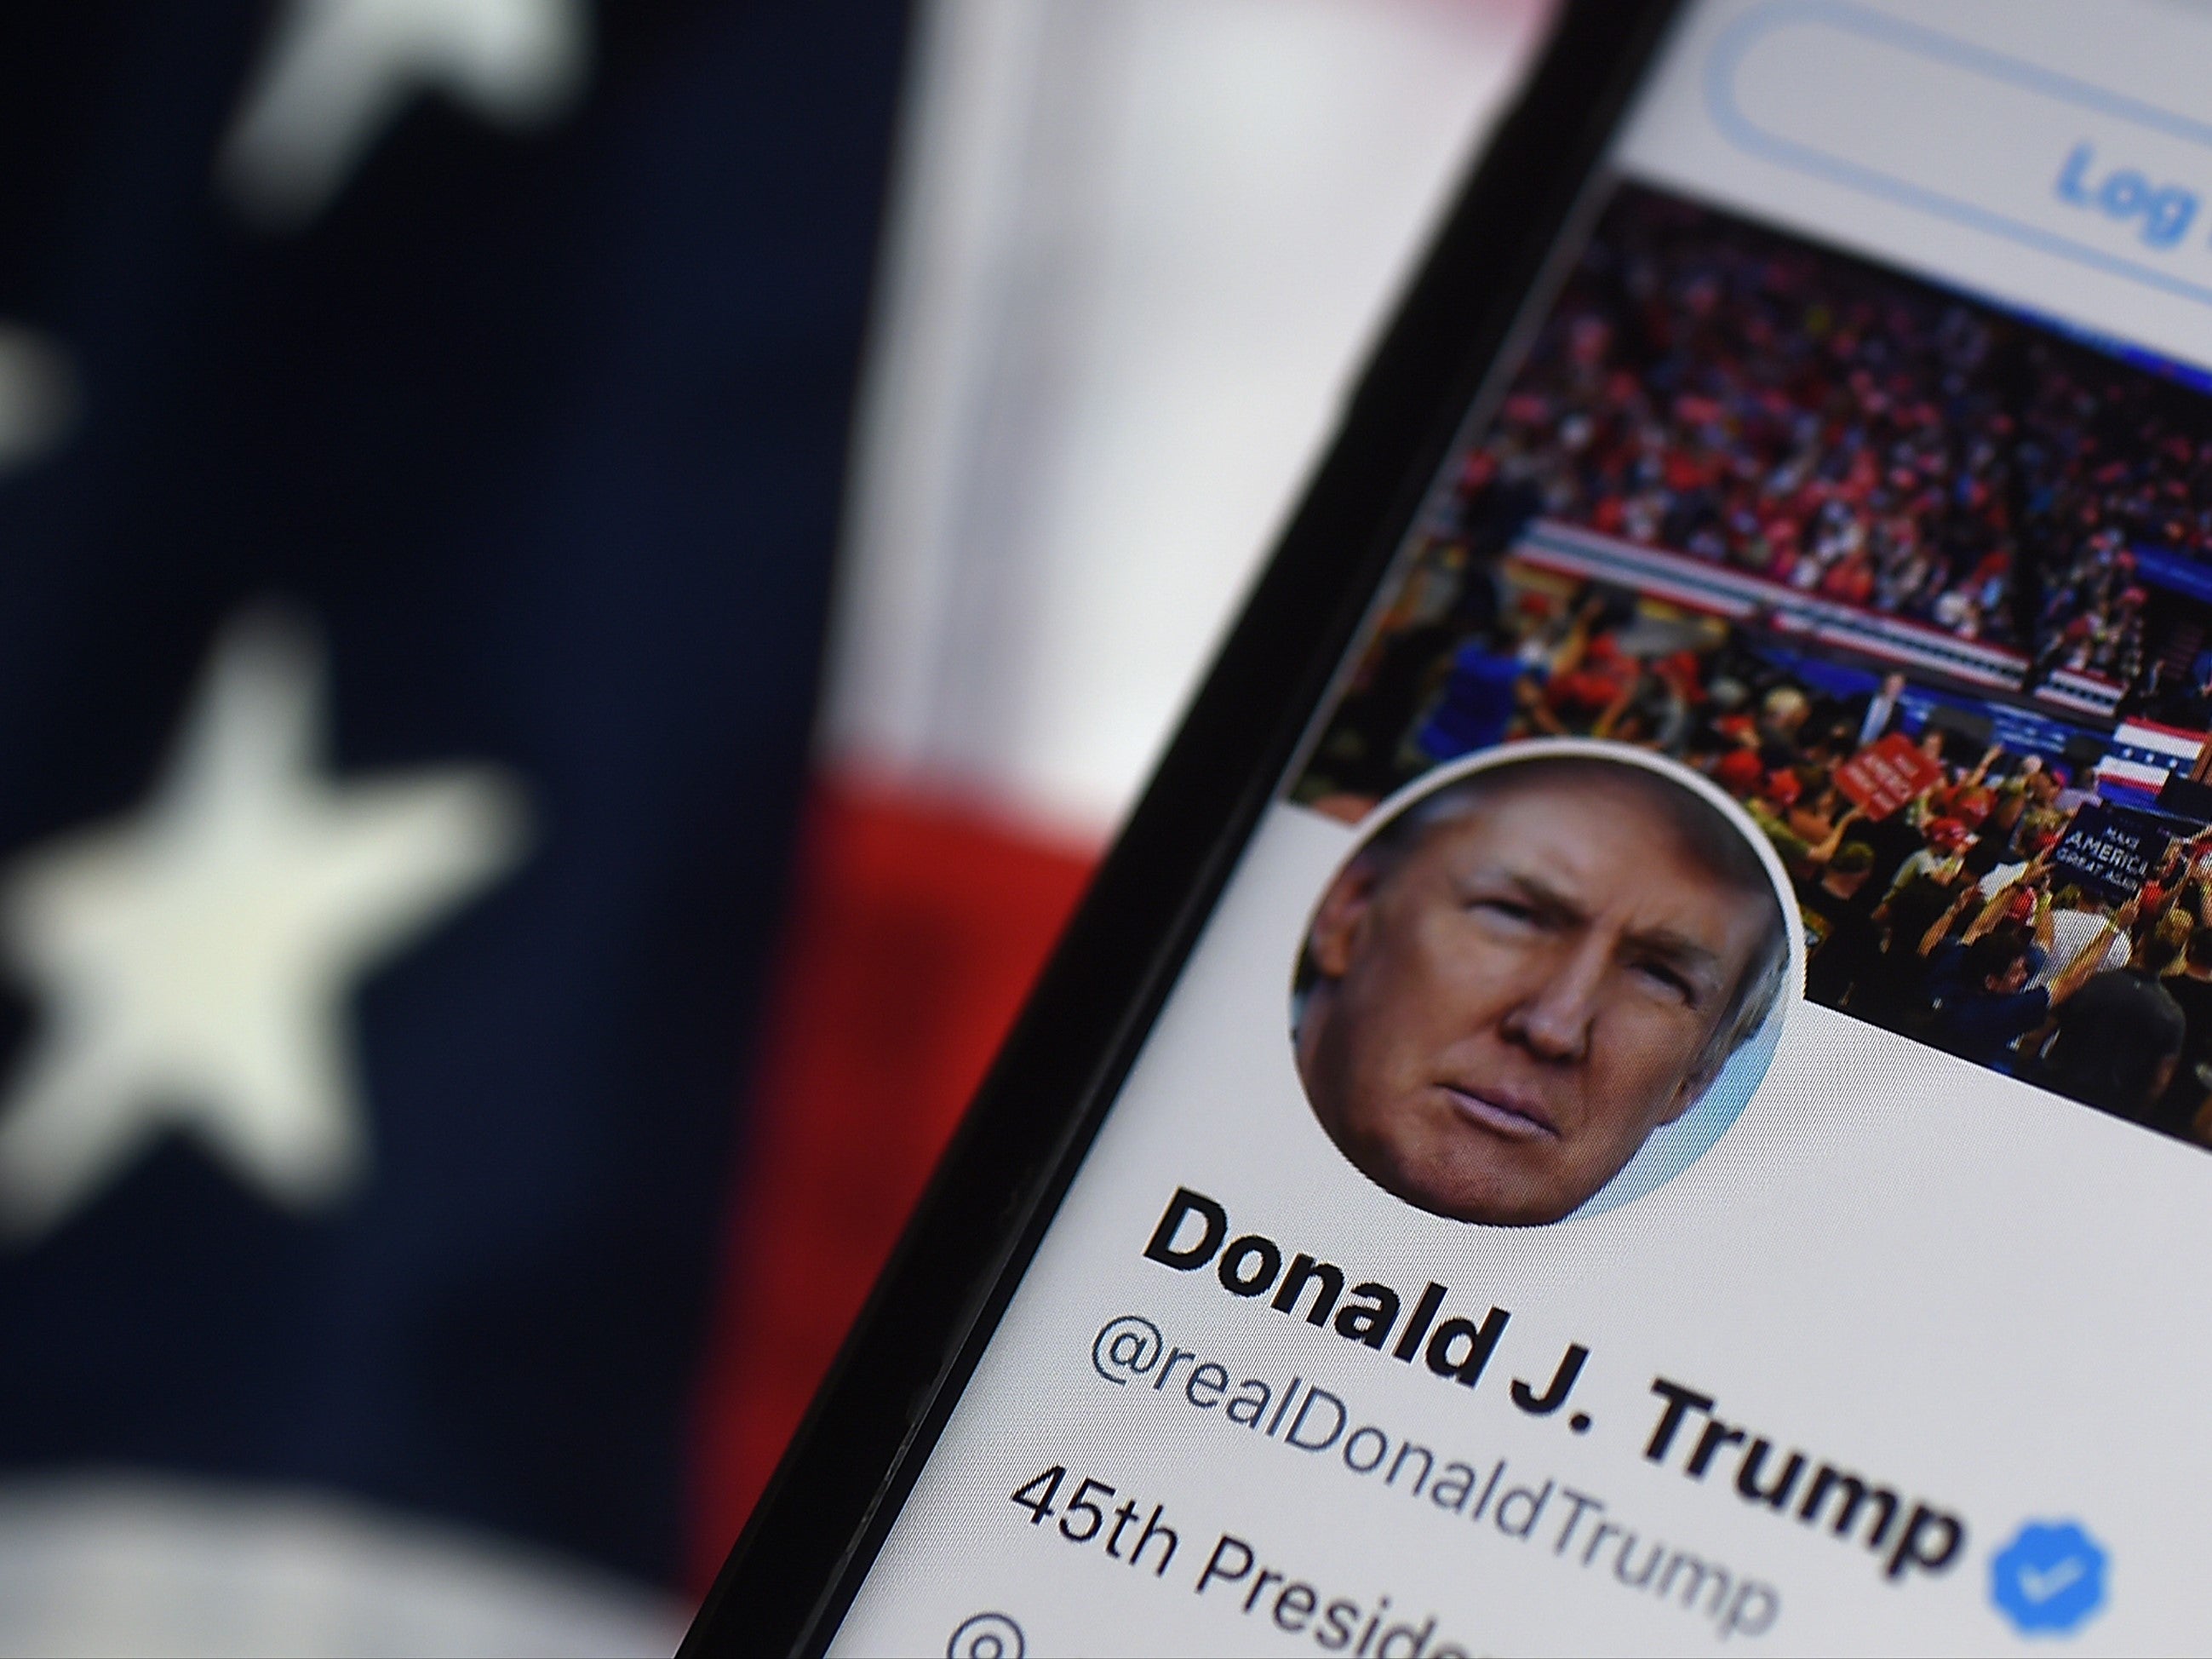 Twitter has flagged seven of Donald Trump’s tweets since the election